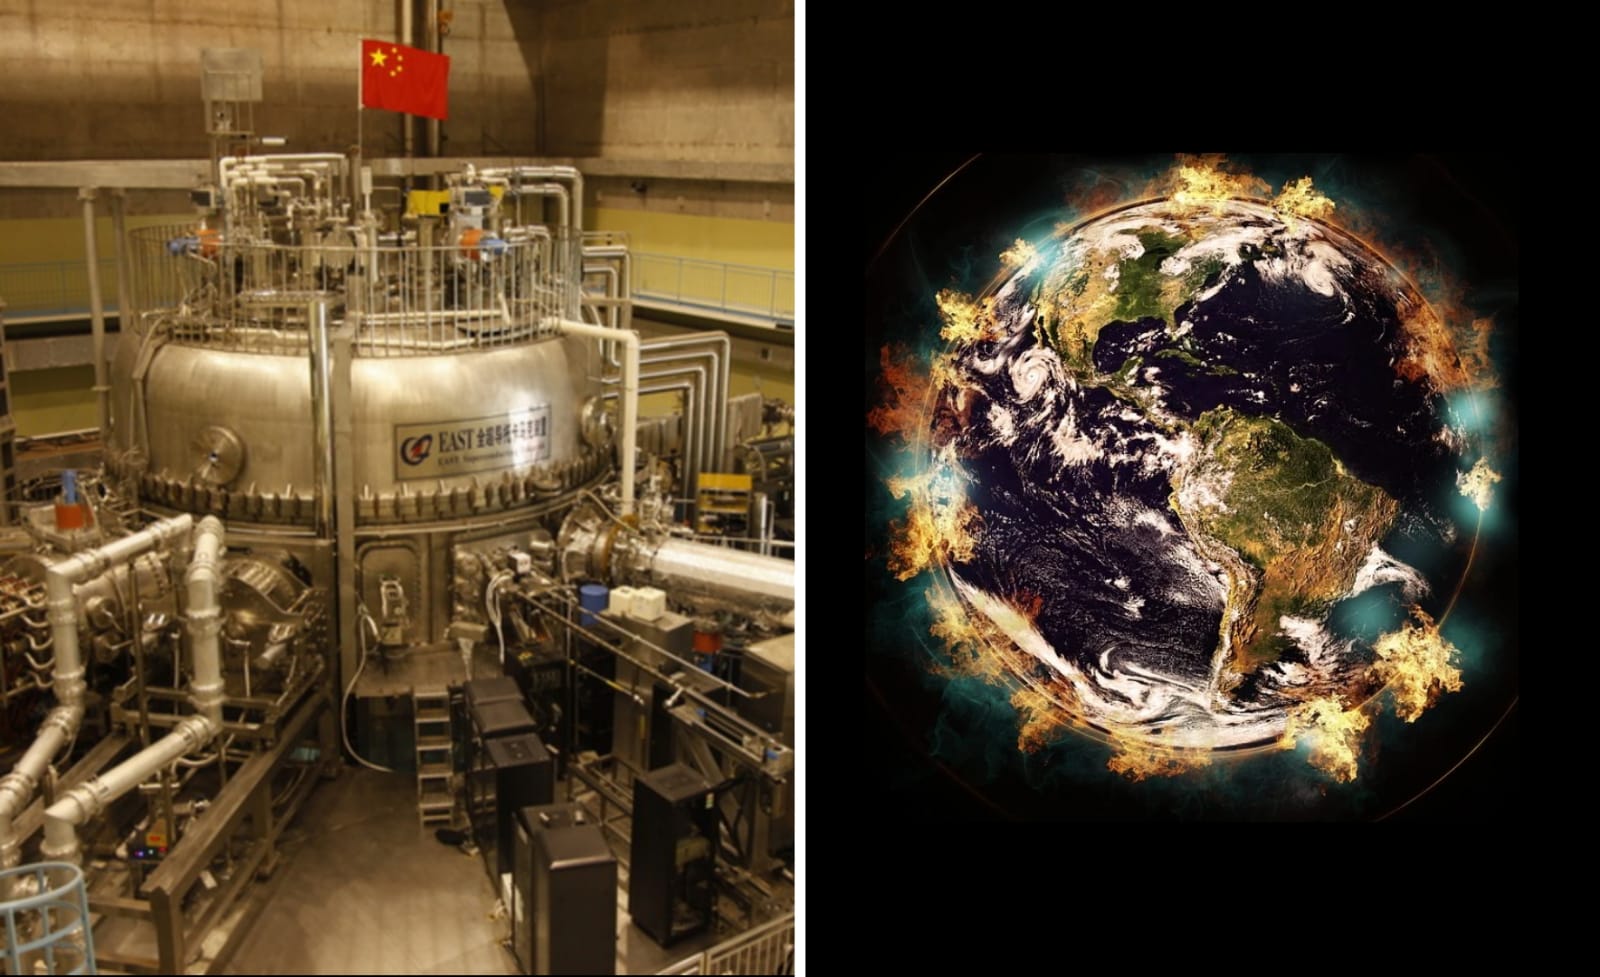 Will China's artificial sun be a threat to the environment?